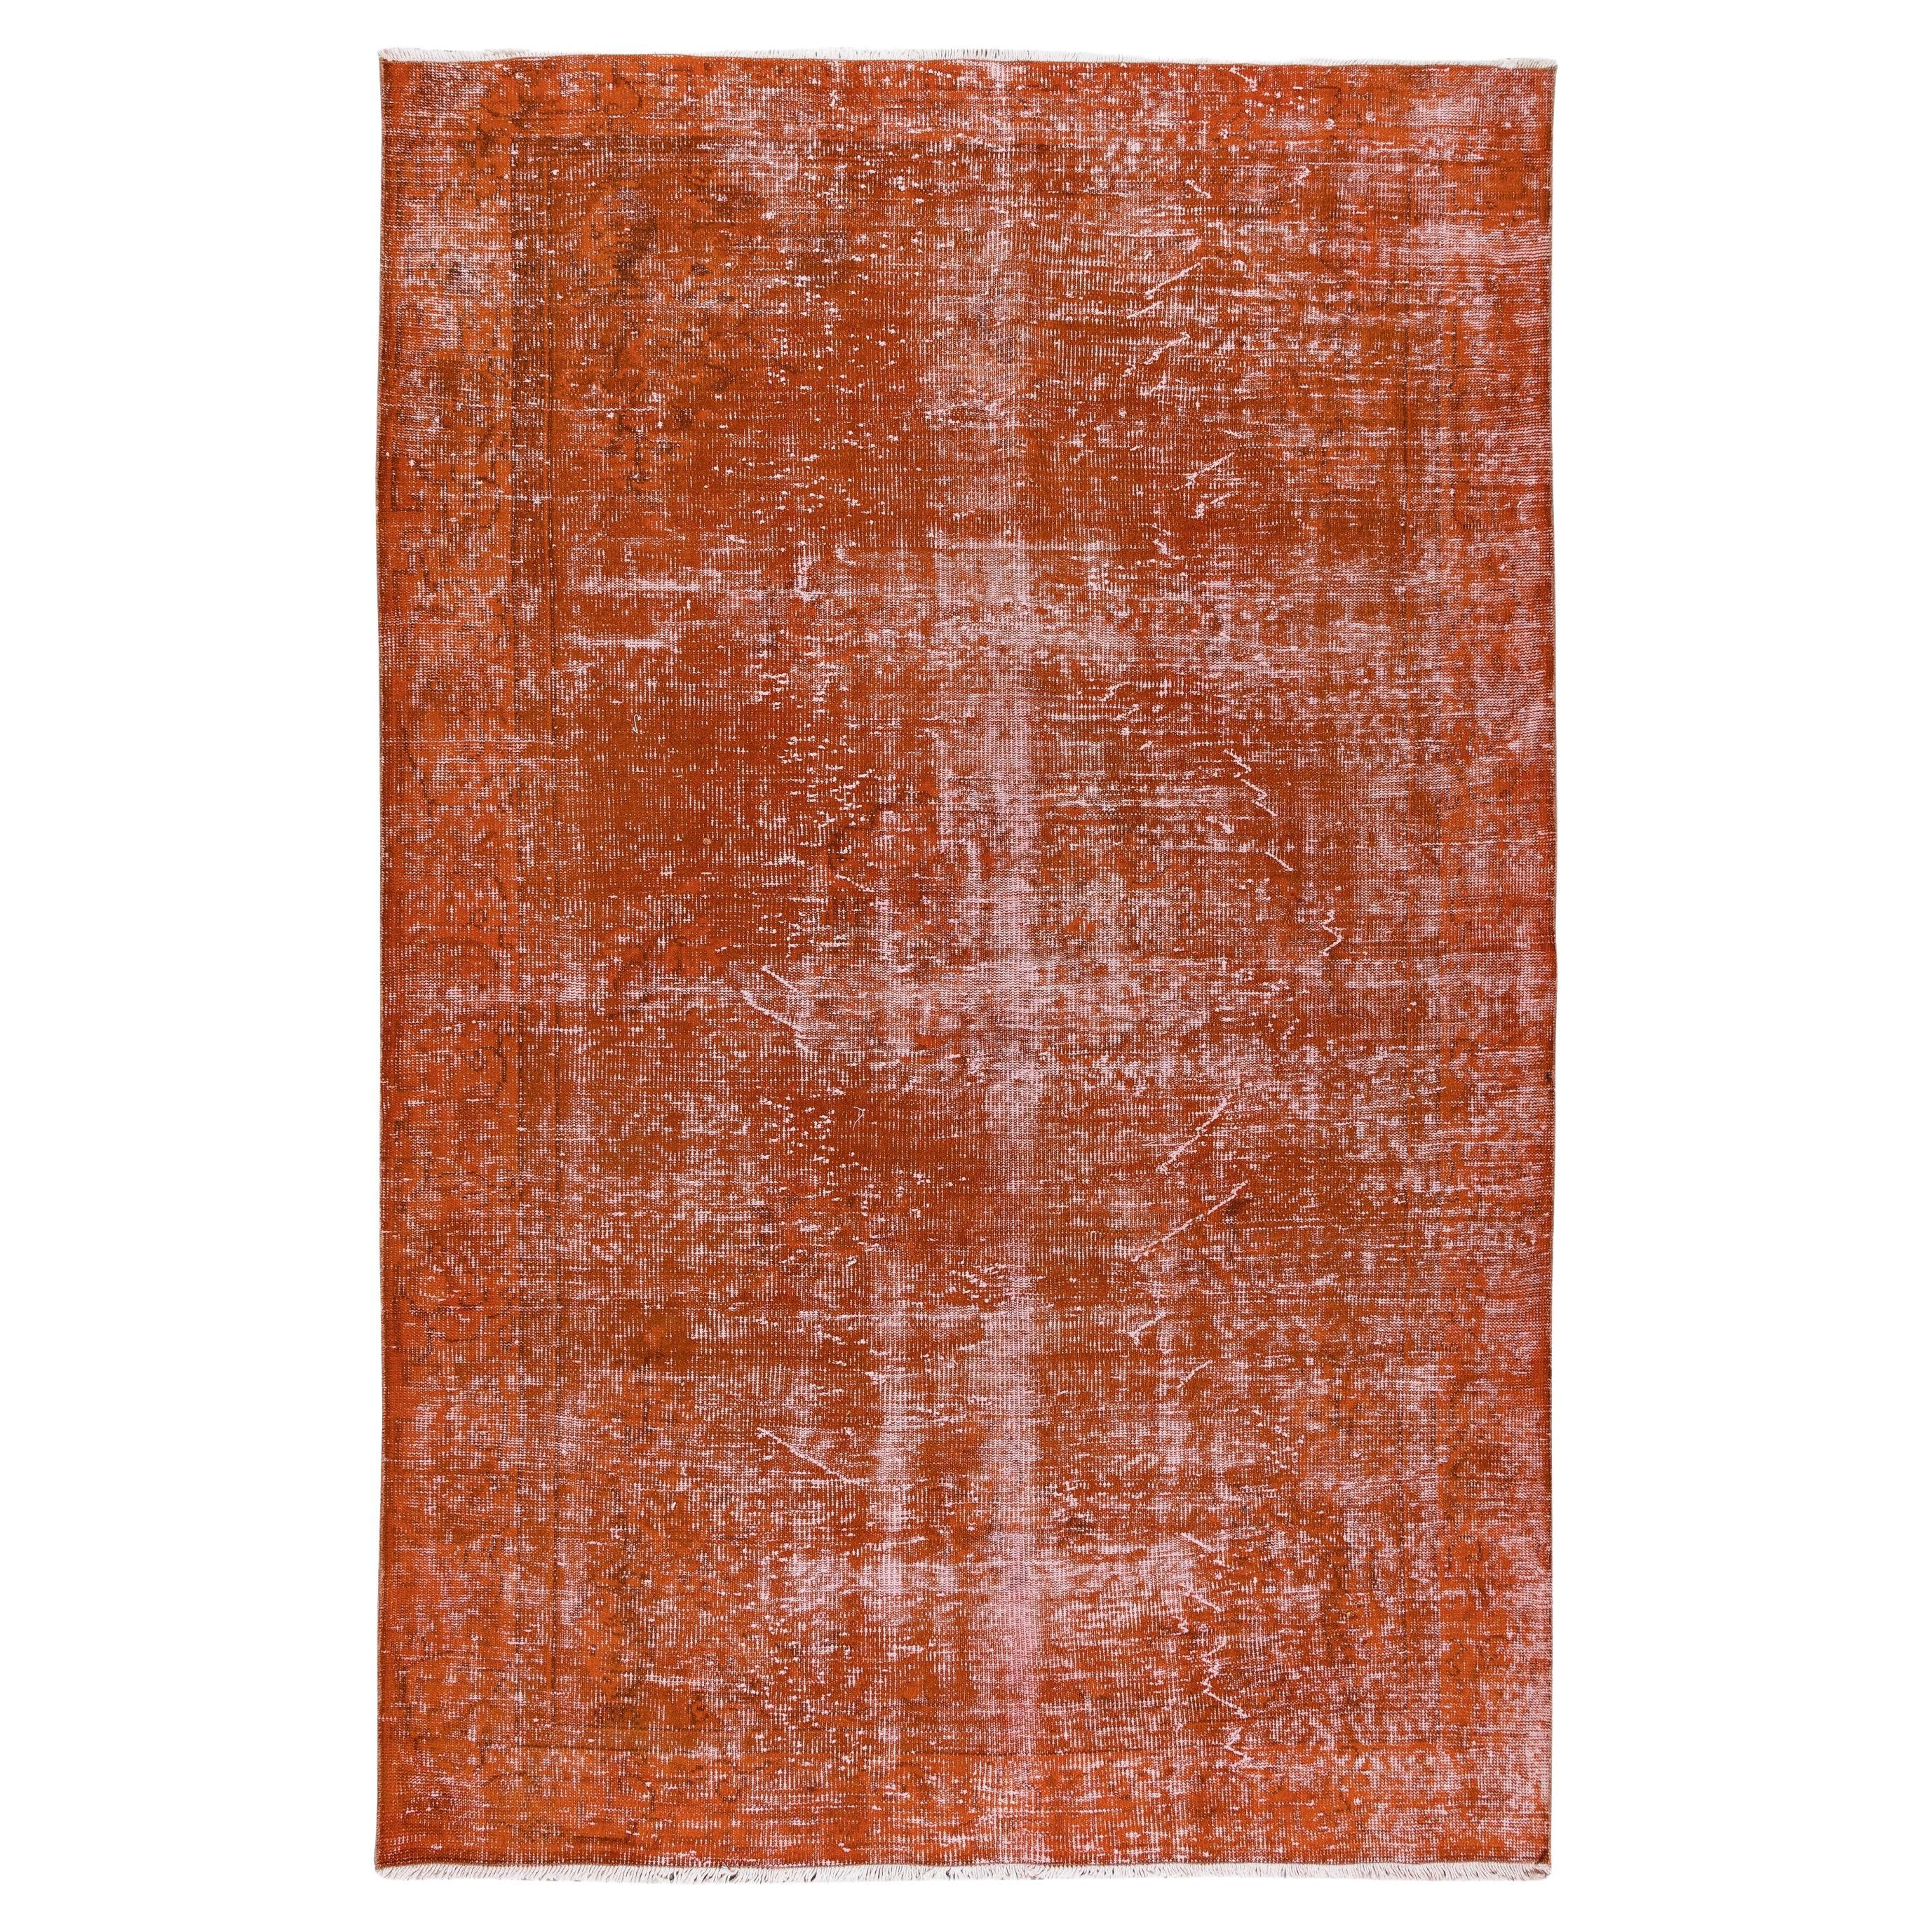 6.6x10 Ft Handmade Turkish Area Rug Re-Dyed in Orange for Modern Interiors